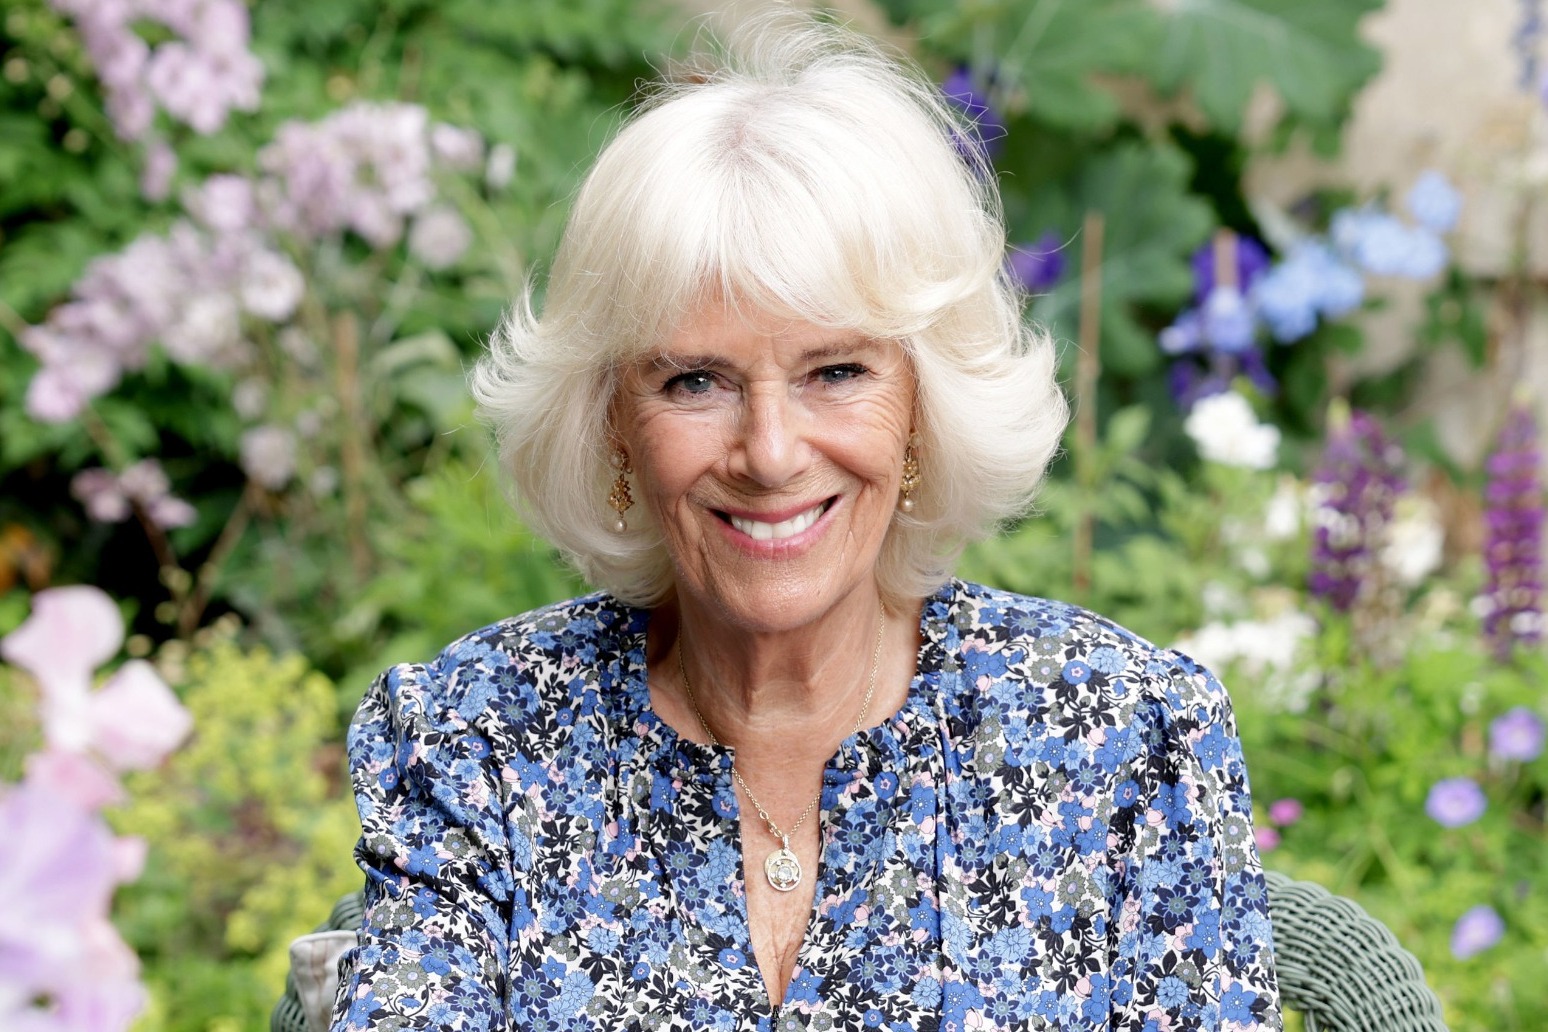 Camilla’s 75th birthday marked by release of official photograph 